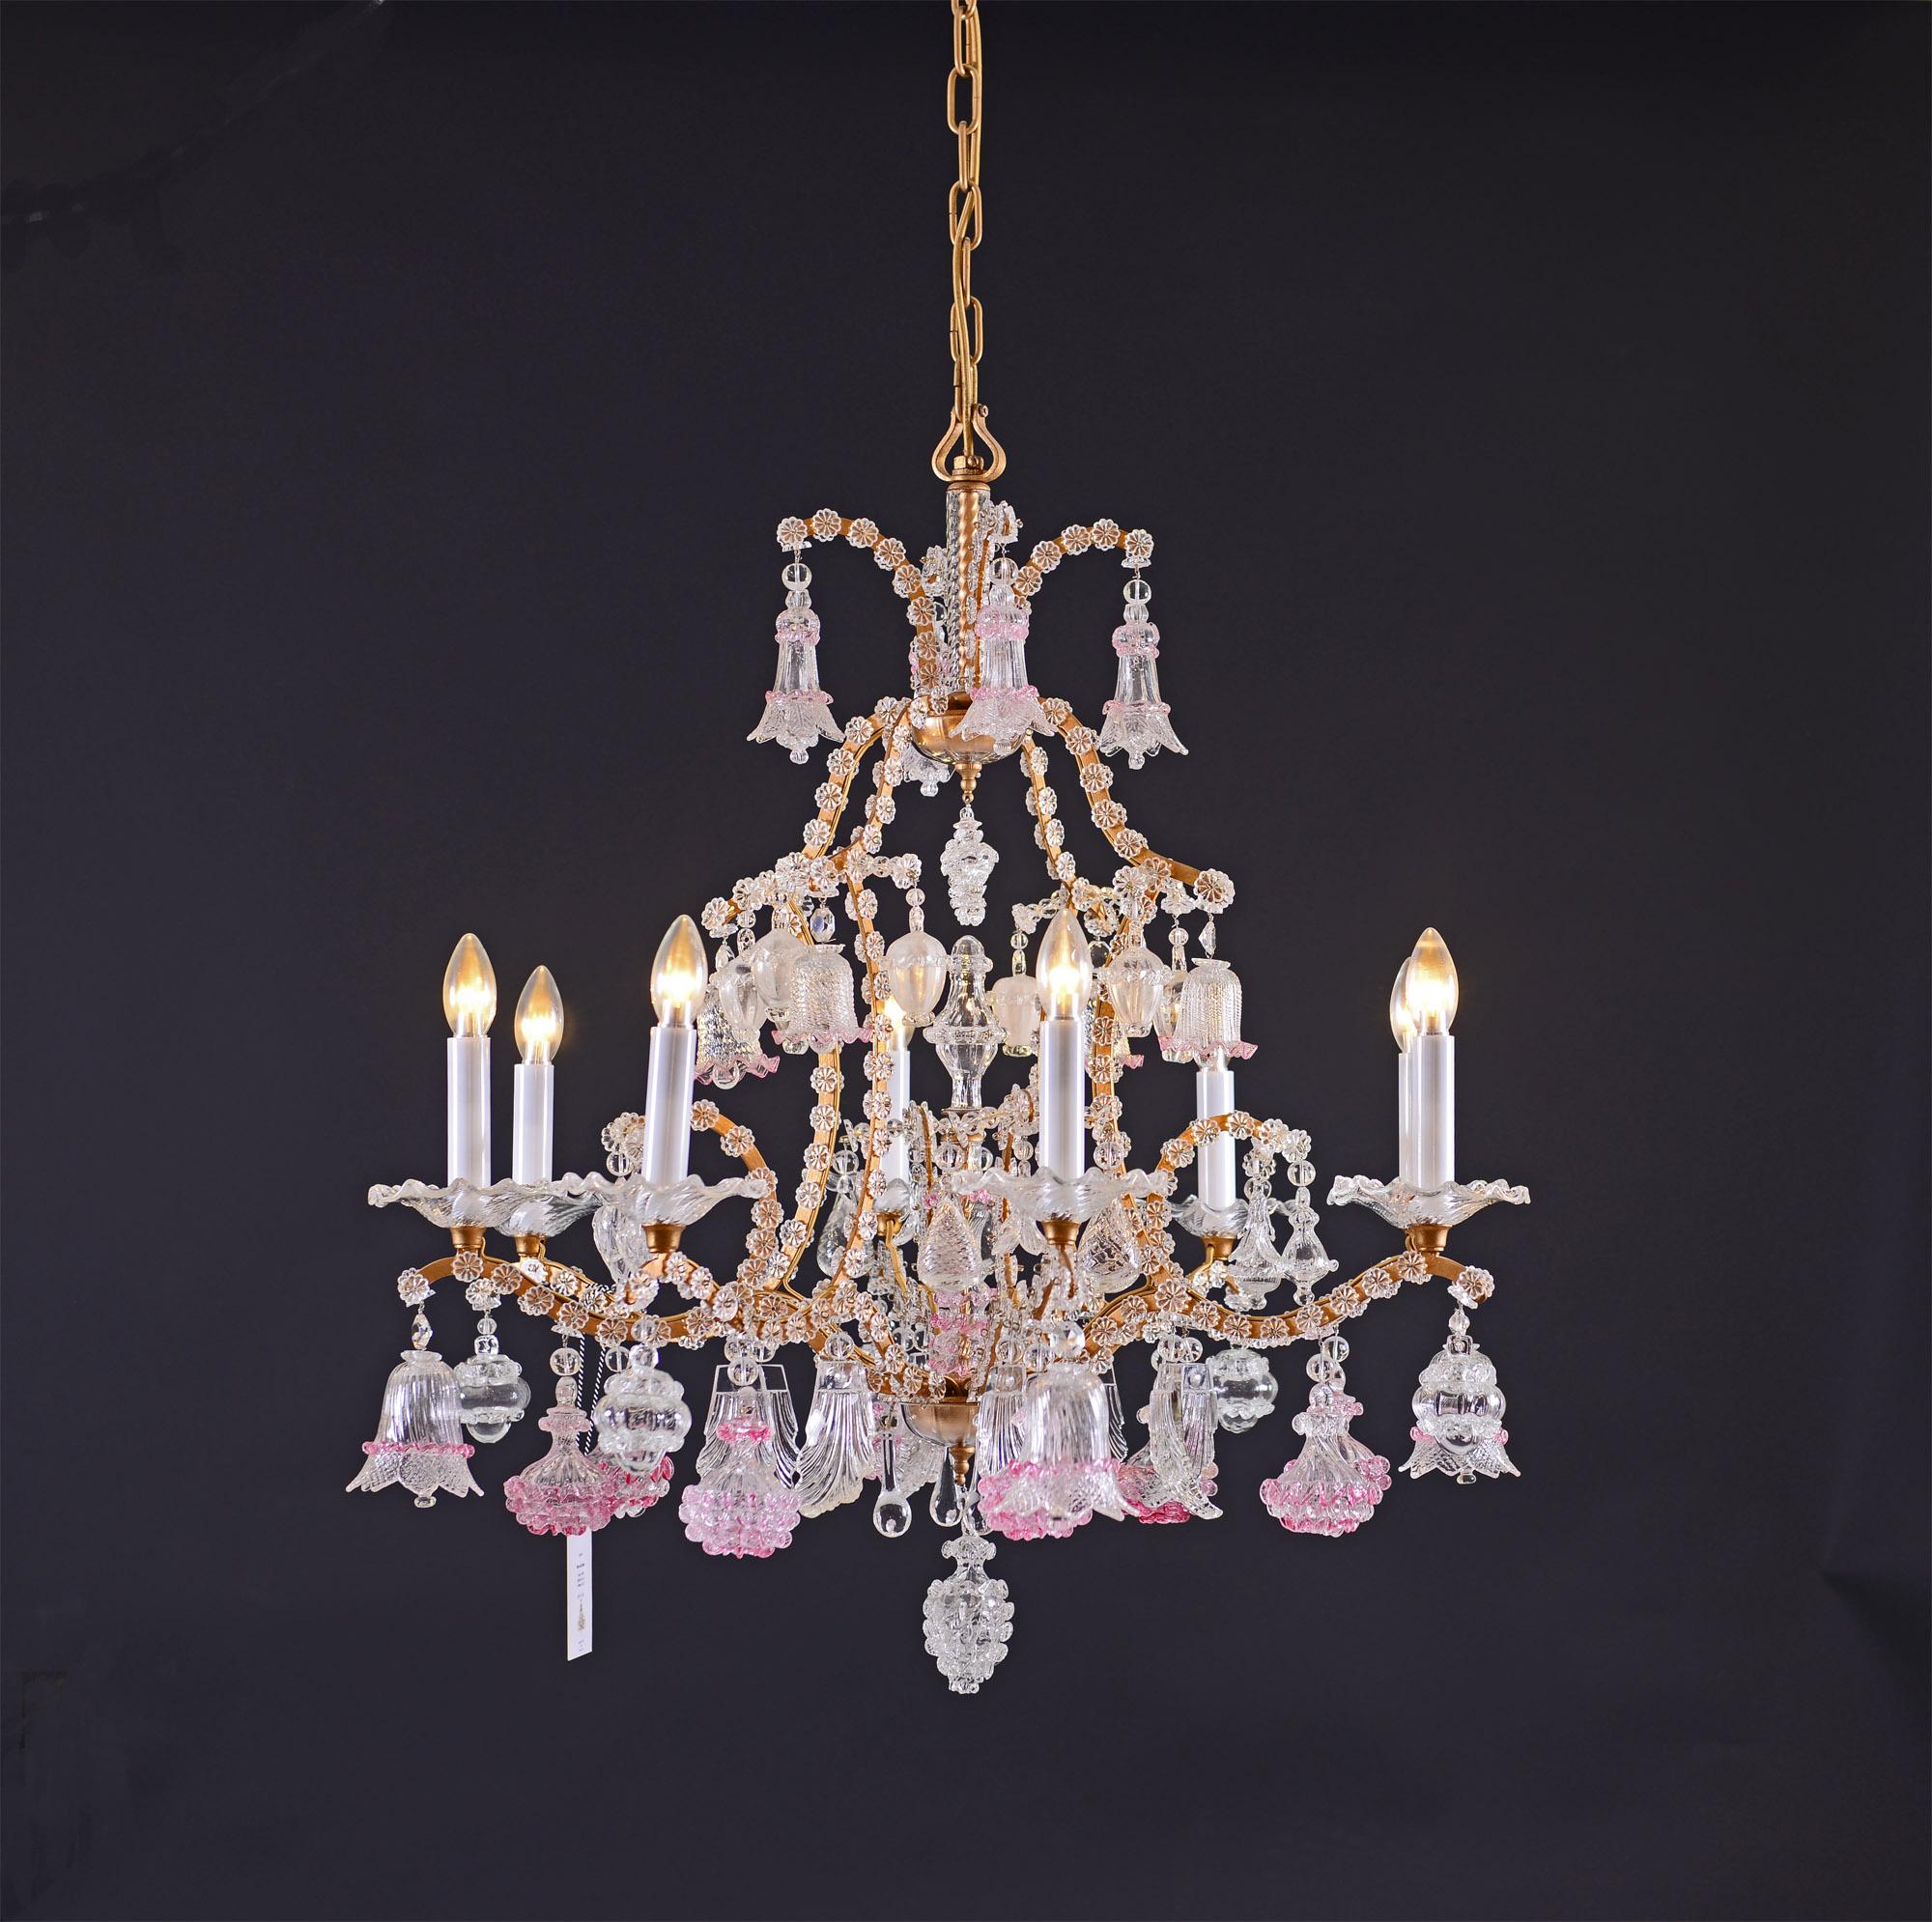 Hand-Crafted Beautiful Original Maria Theresia Chandelier in the Baroque Style from 1880 For Sale